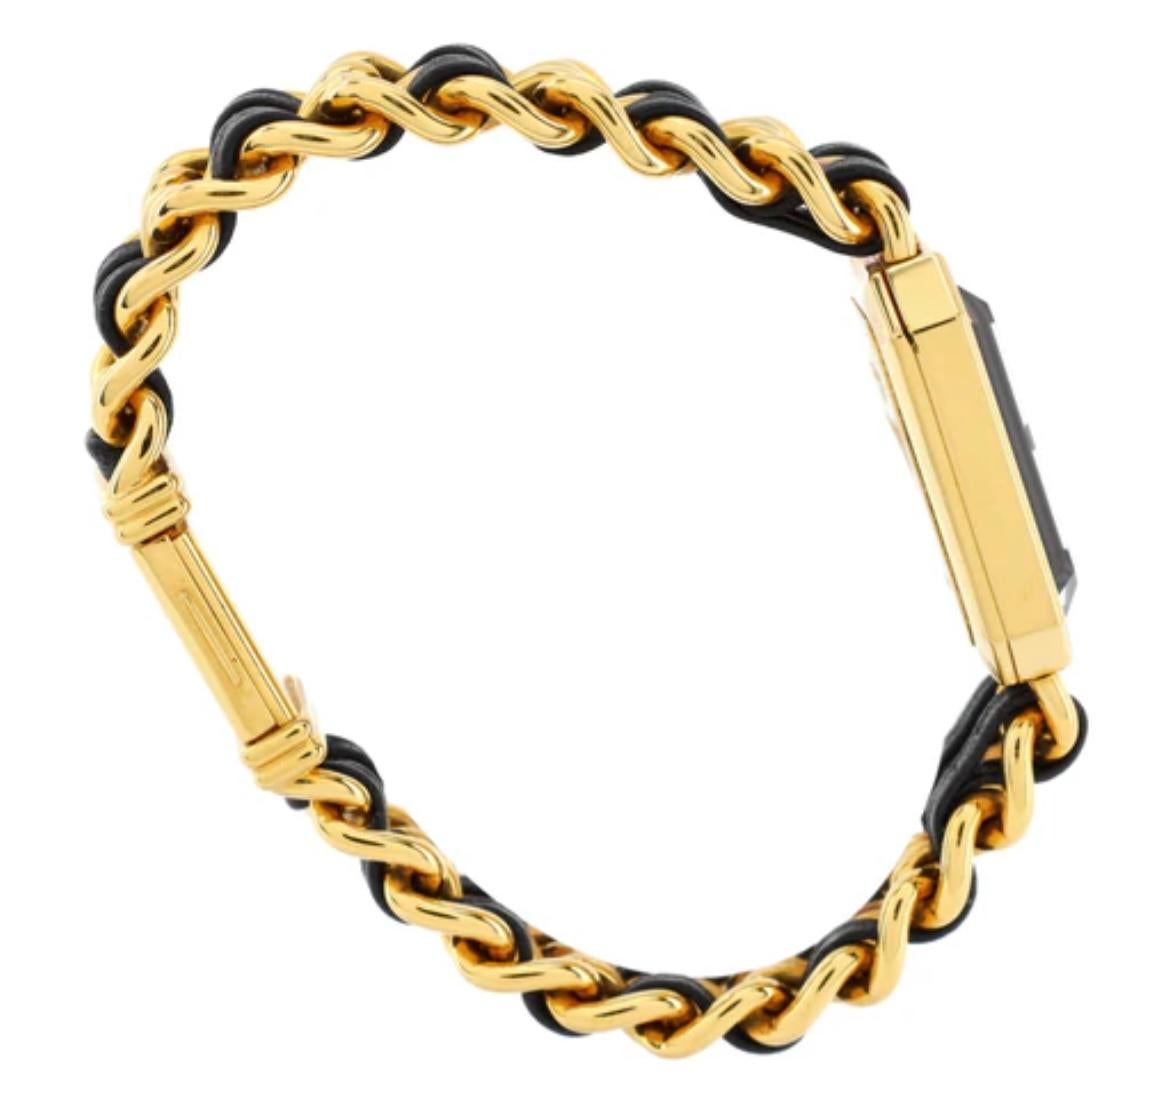 Brand: Chanel 

Model Name: Premier 

Movement: quartz

Case Size: 20 x 26 mm

Case Back: Solid 

Case Material: Gold Plated

Bezel: Gold Plated

Dial:Black Laquered 

Bracelet: Gold Plated Bracelet w Leather 

Hour Markers: No Hour Markers